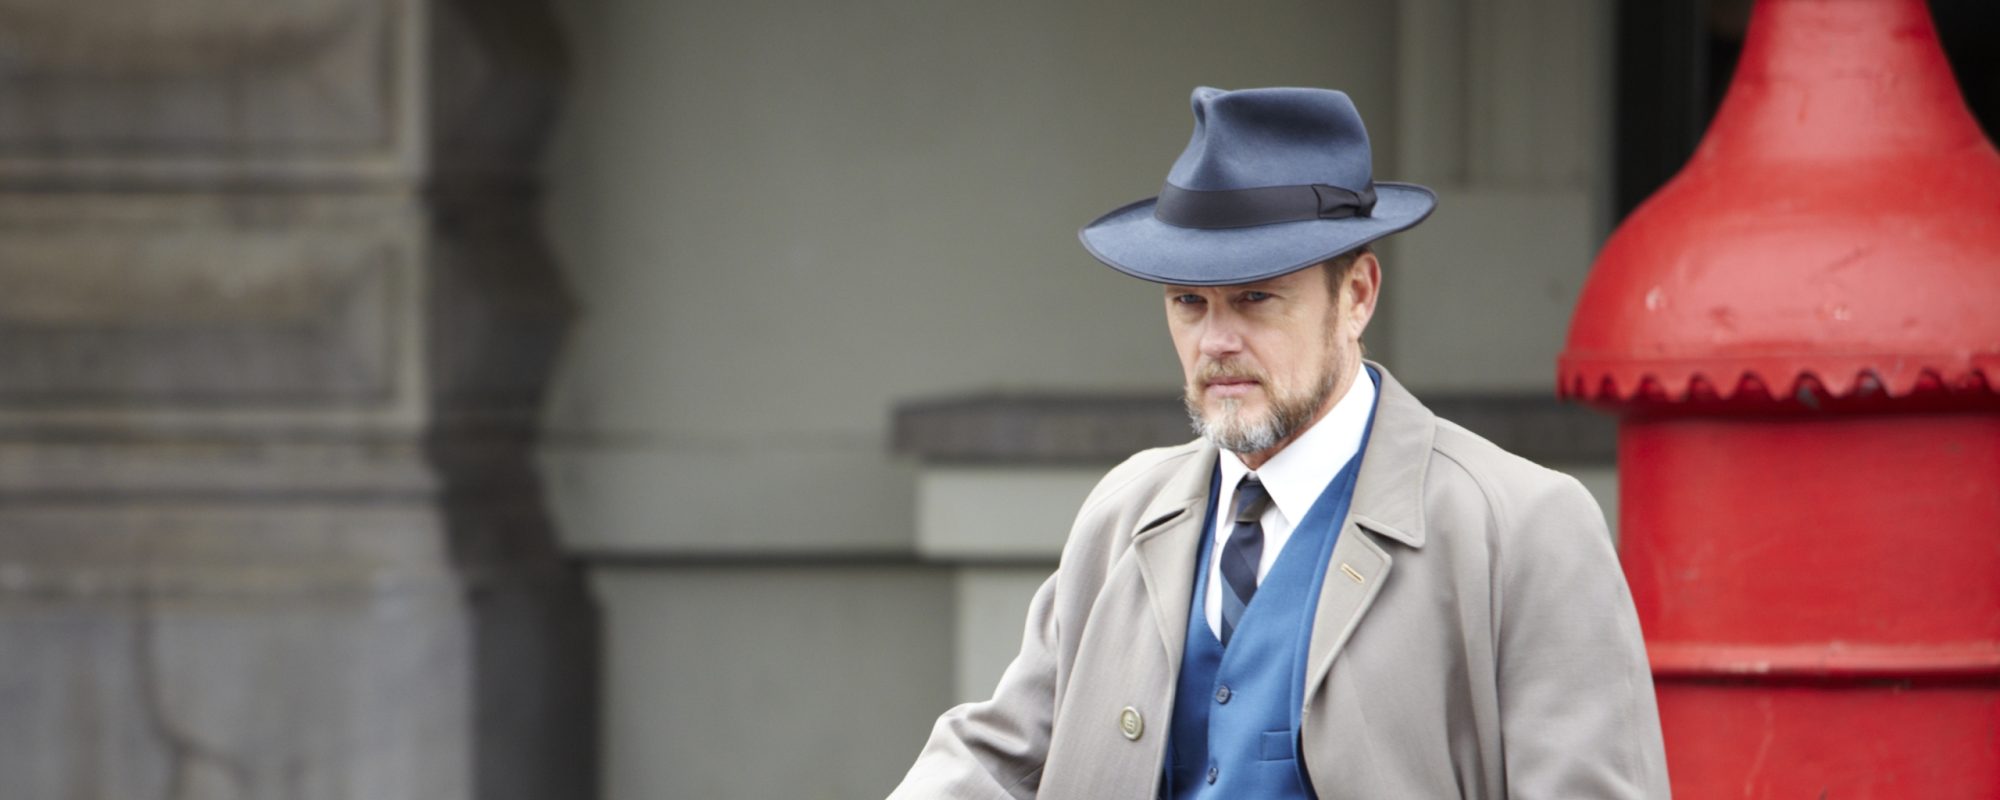 THE DOCTOR IS IN! OVATION TV TO AIR <em>THE DOCTOR BLAKE MYSTERIES</em> STARTING ON JULY 7